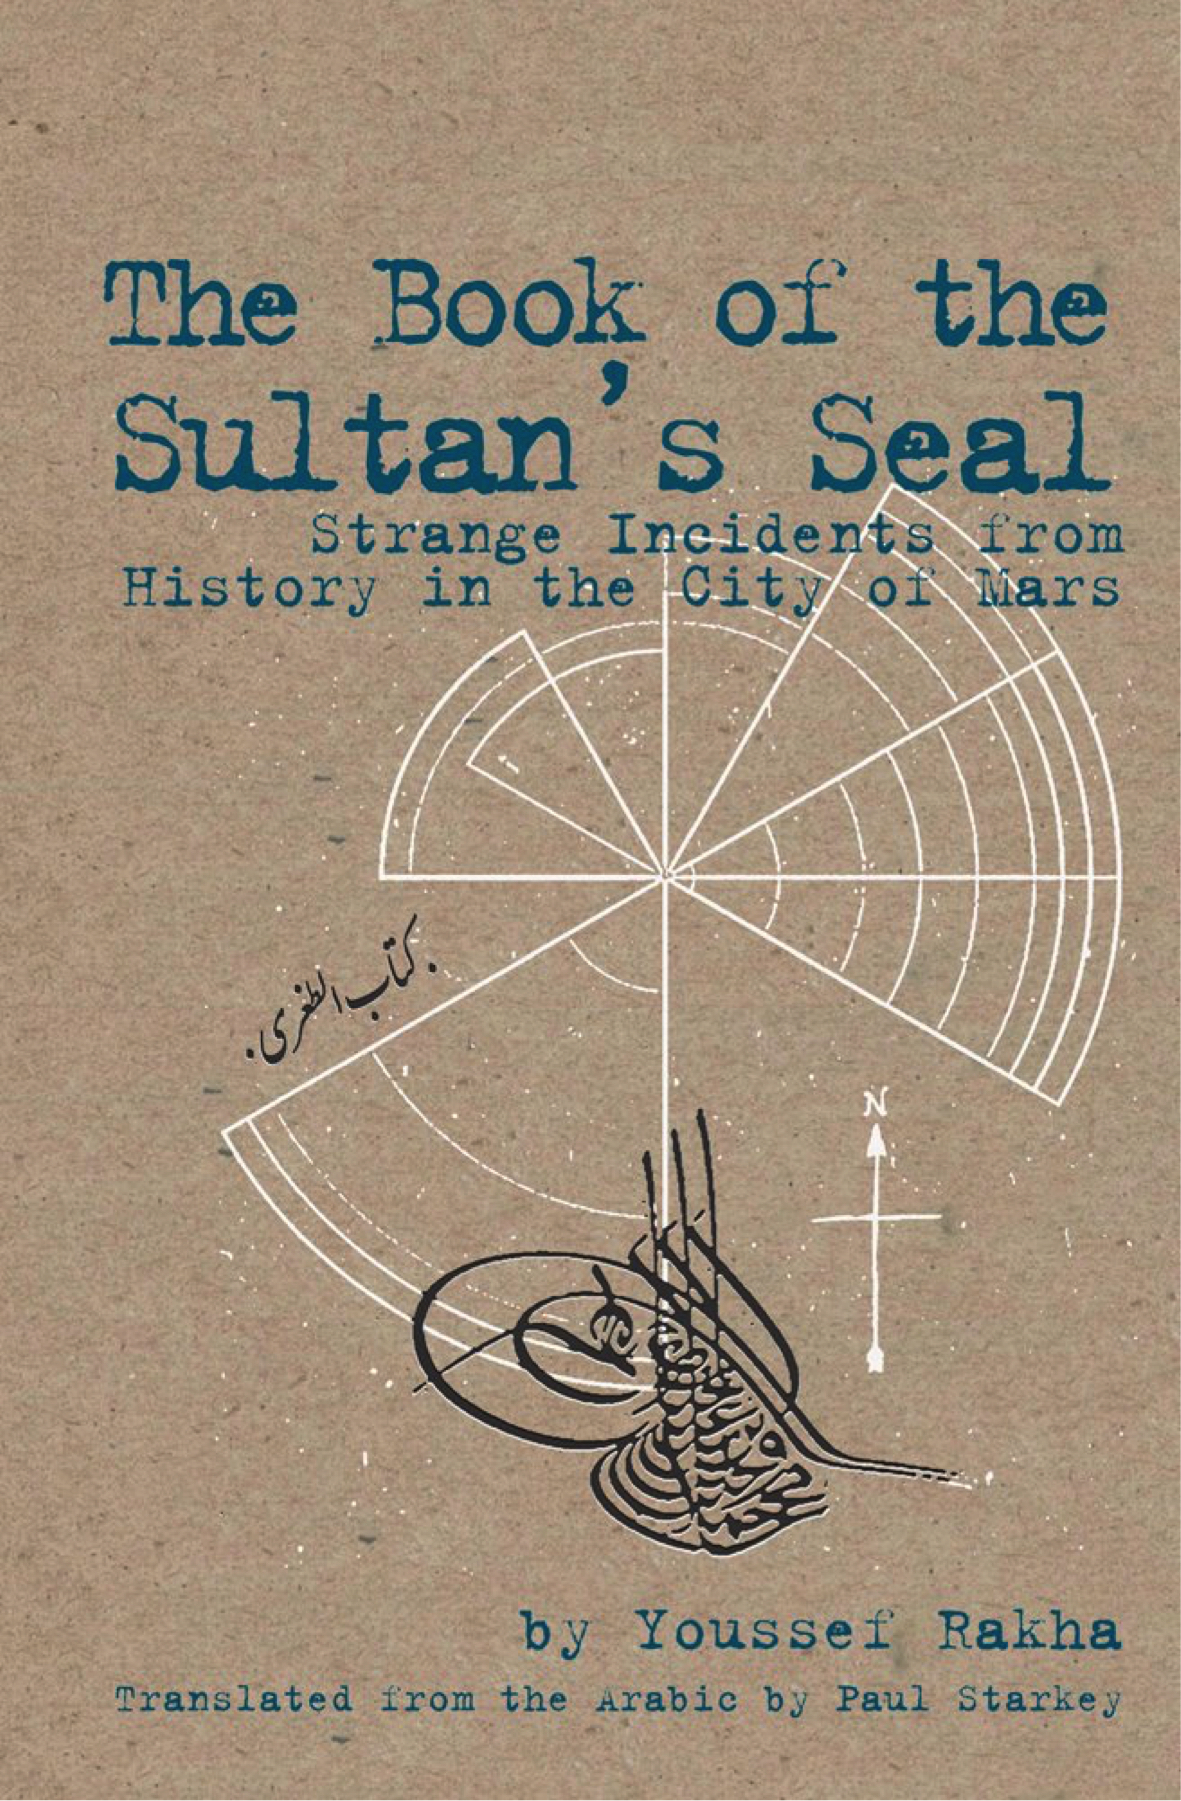 Buchcover: Youssef Rakhas erster Roman "The Book of the Sultan's Seal"